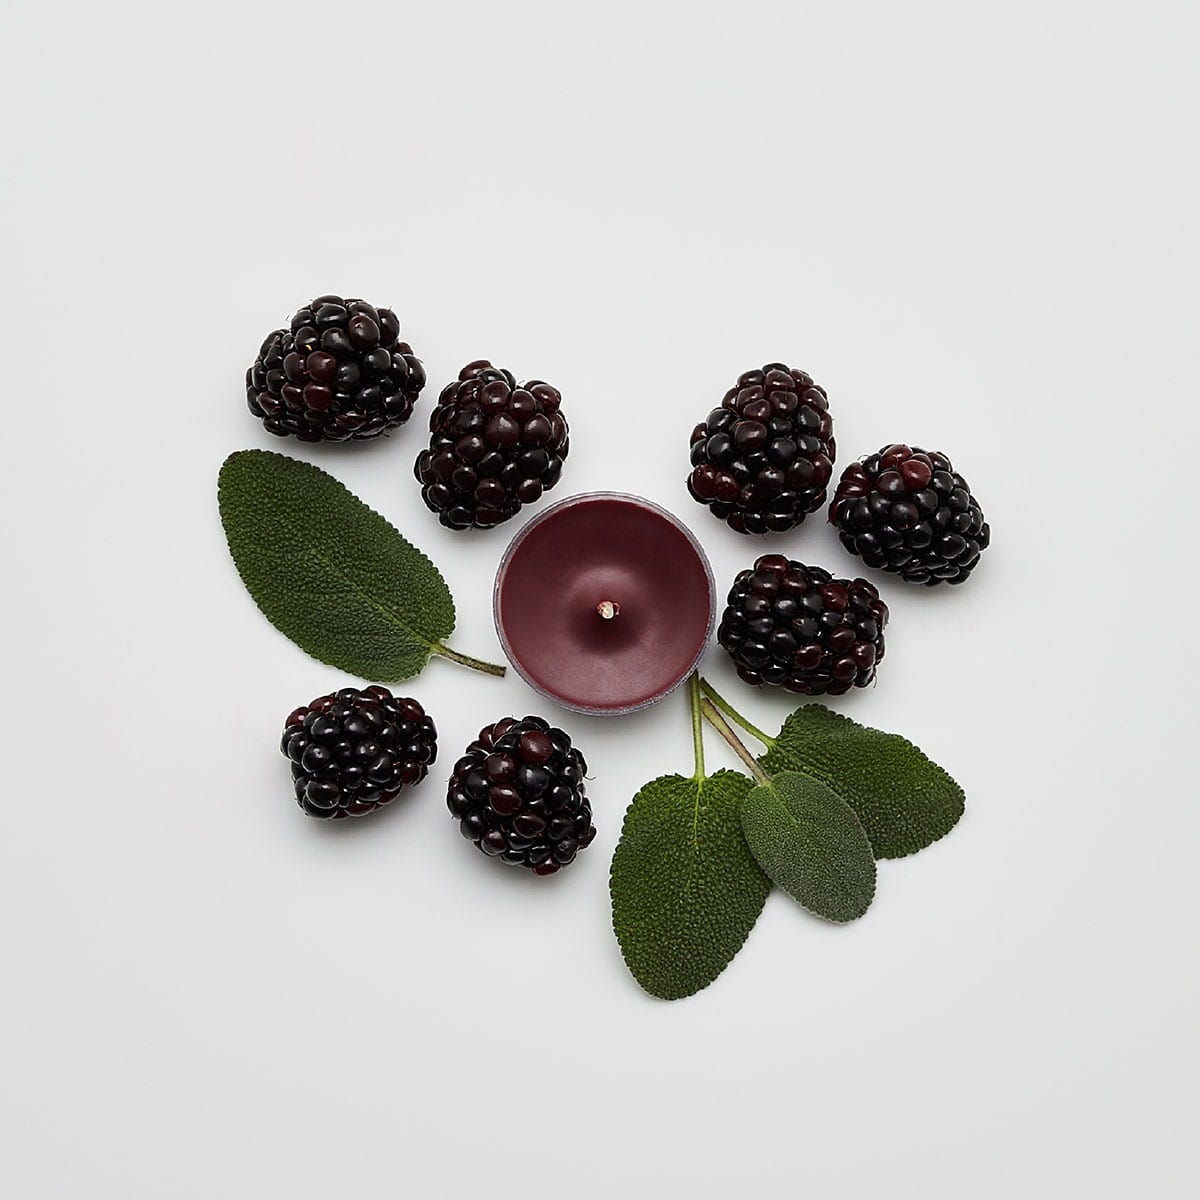 Mulberry Universal Tealight® Candles - PartyLite US